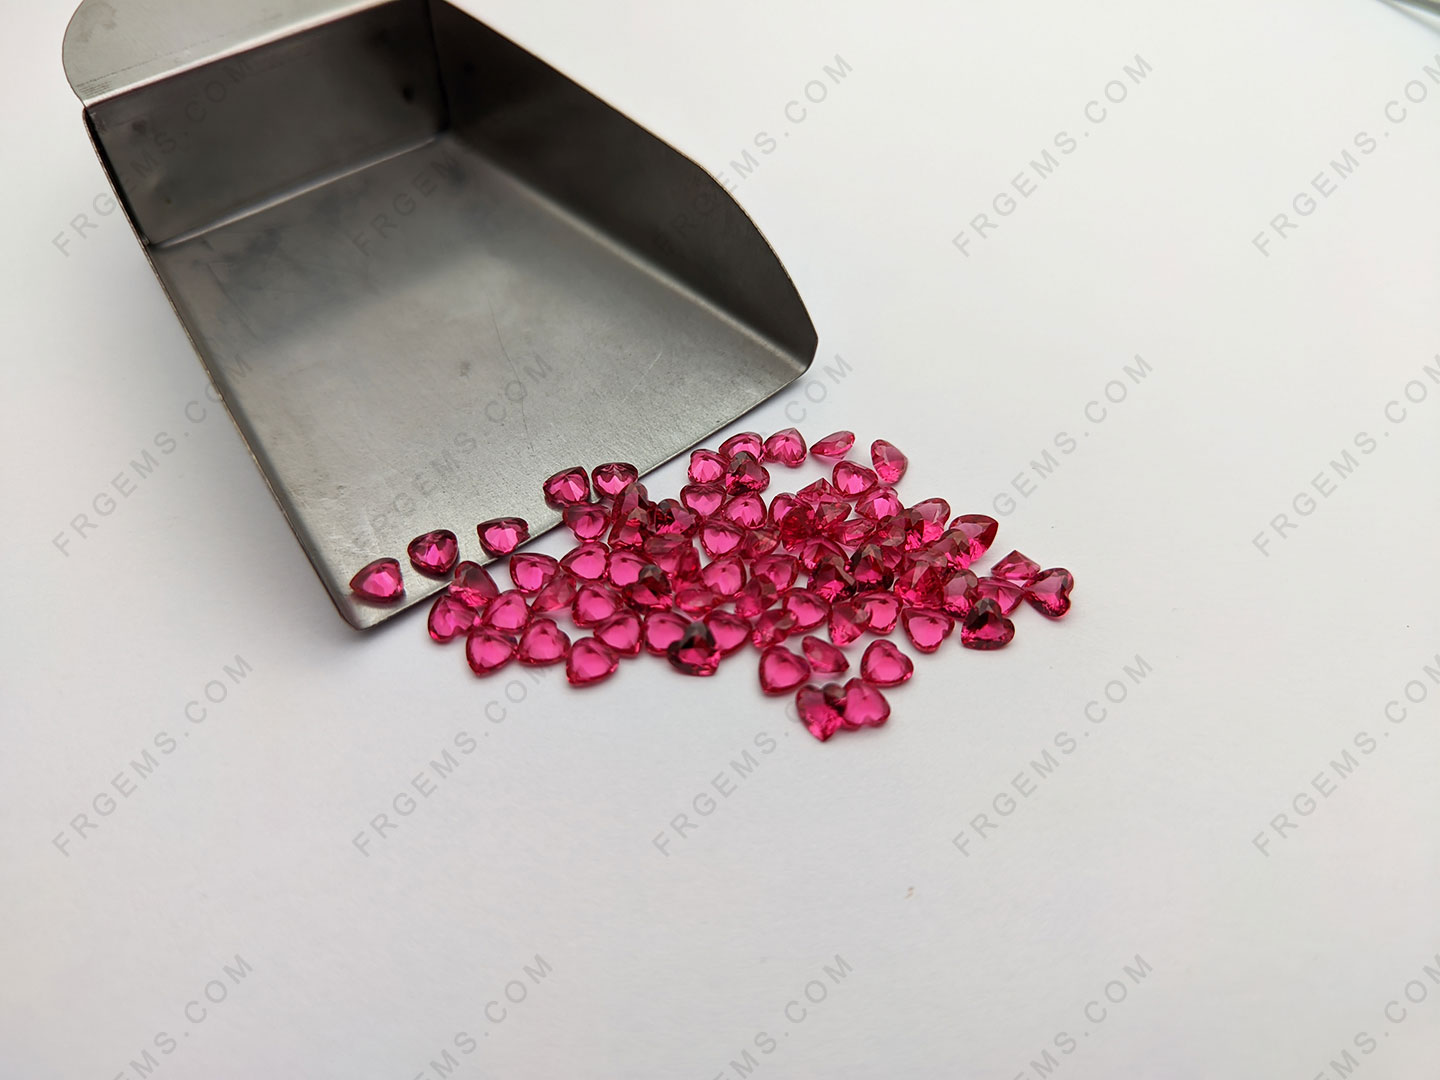 Wholesale Loose Nano Crystal Ruby Red Color 190/3# Heart shape Faceted Cut 4x4mm gemstones